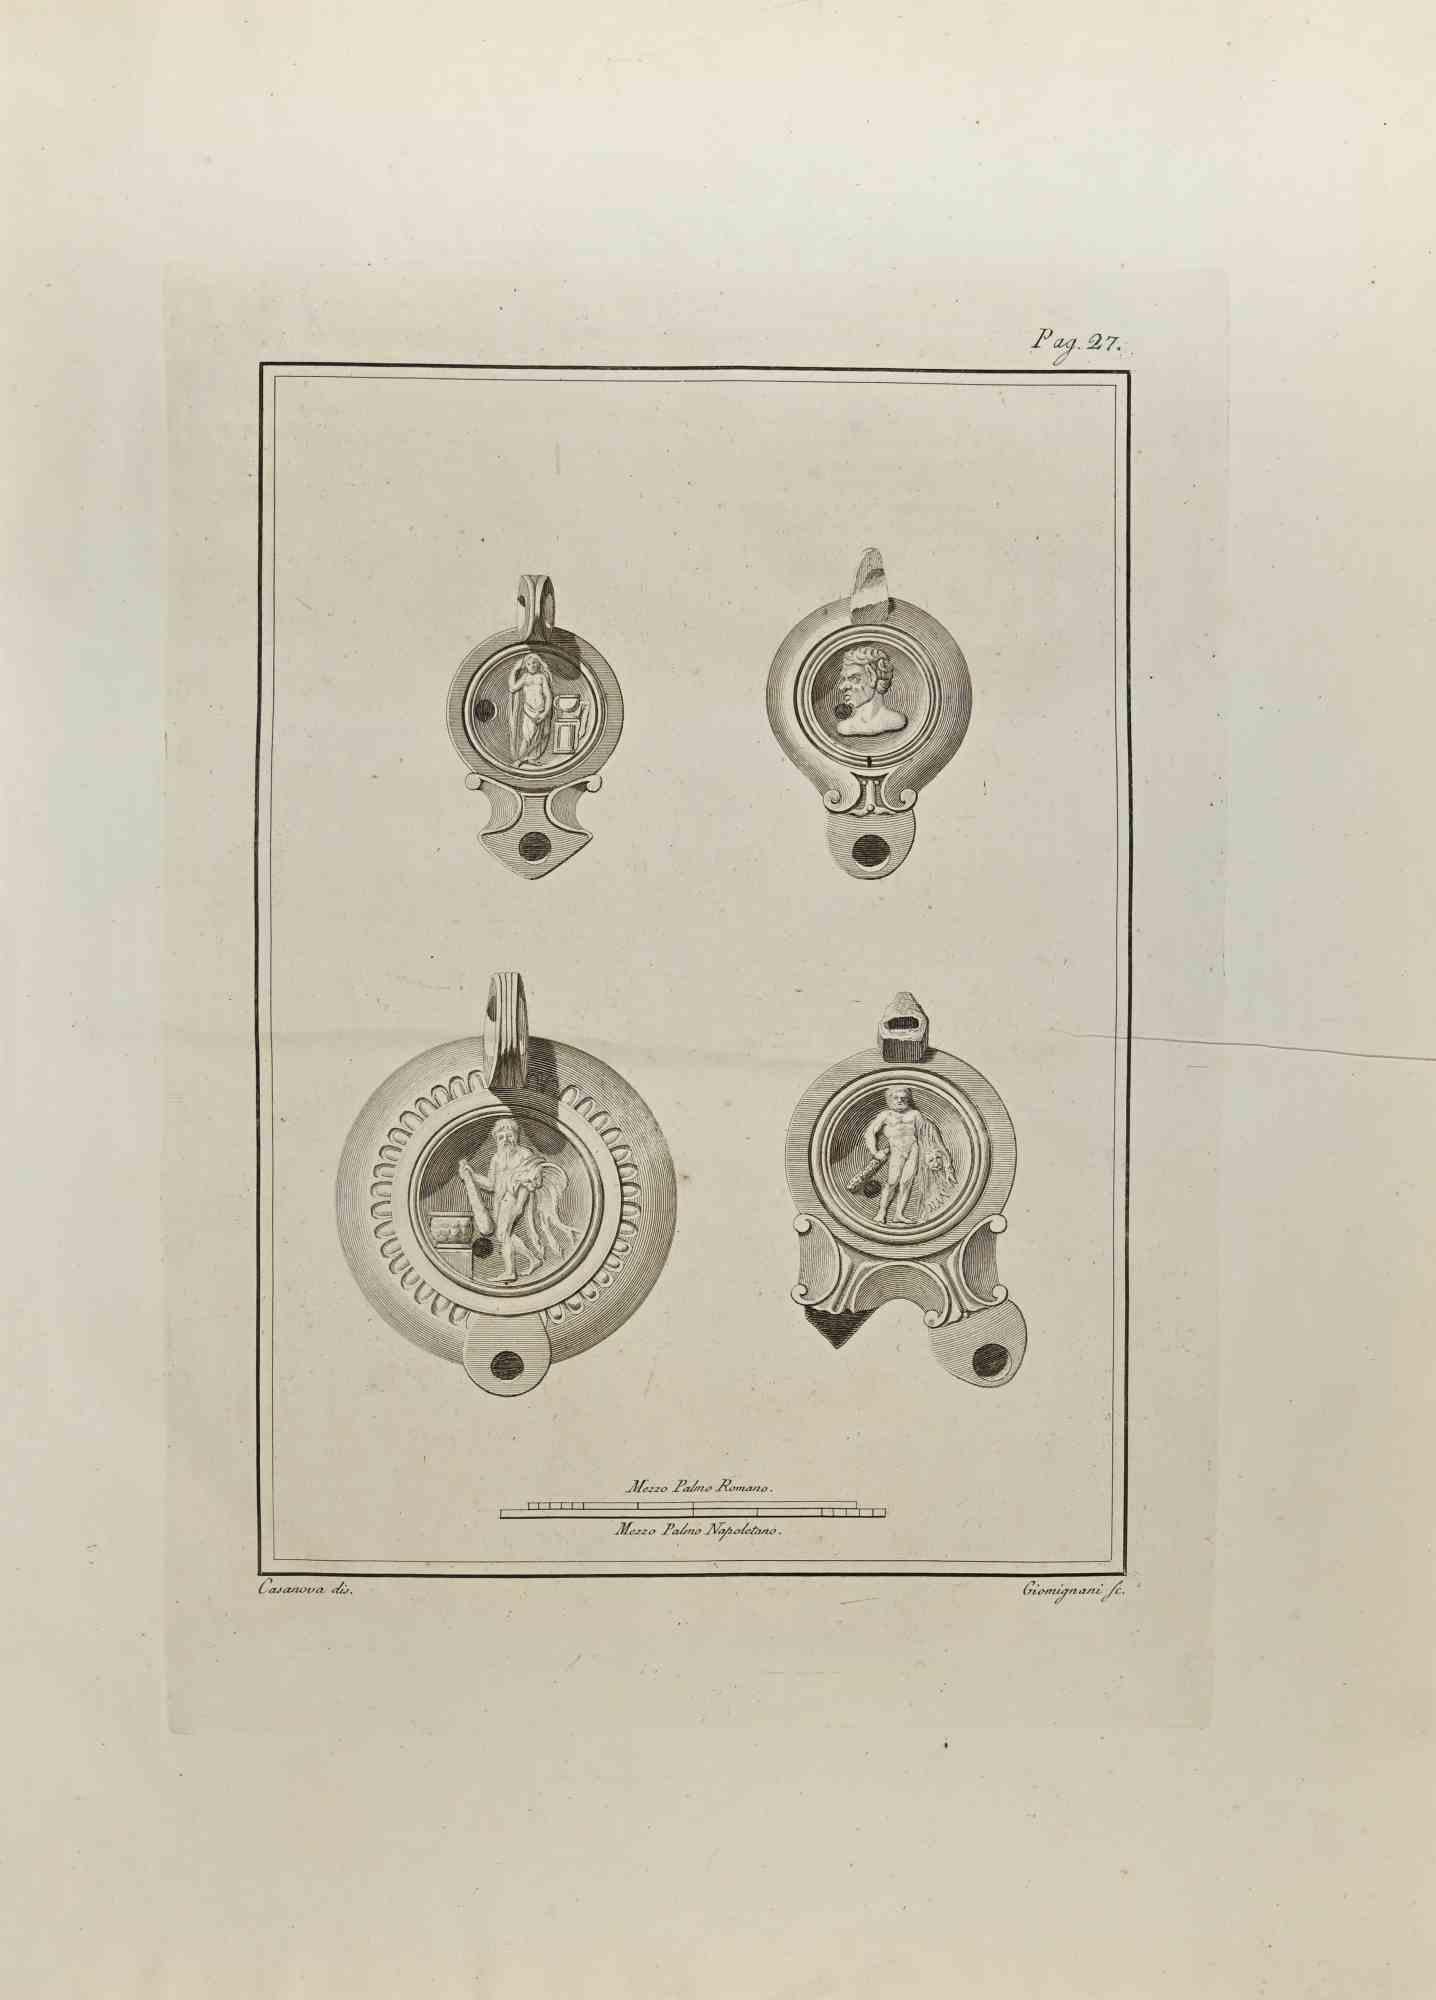 Hercules on Oil Lamp from "Antiquities of Herculaneum" is an etching on paper realized by Francesco Giomignani in the 18th Century.

Signed on the plate.

Good conditions with some folding.

The etching belongs to the print suite “Antiquities of